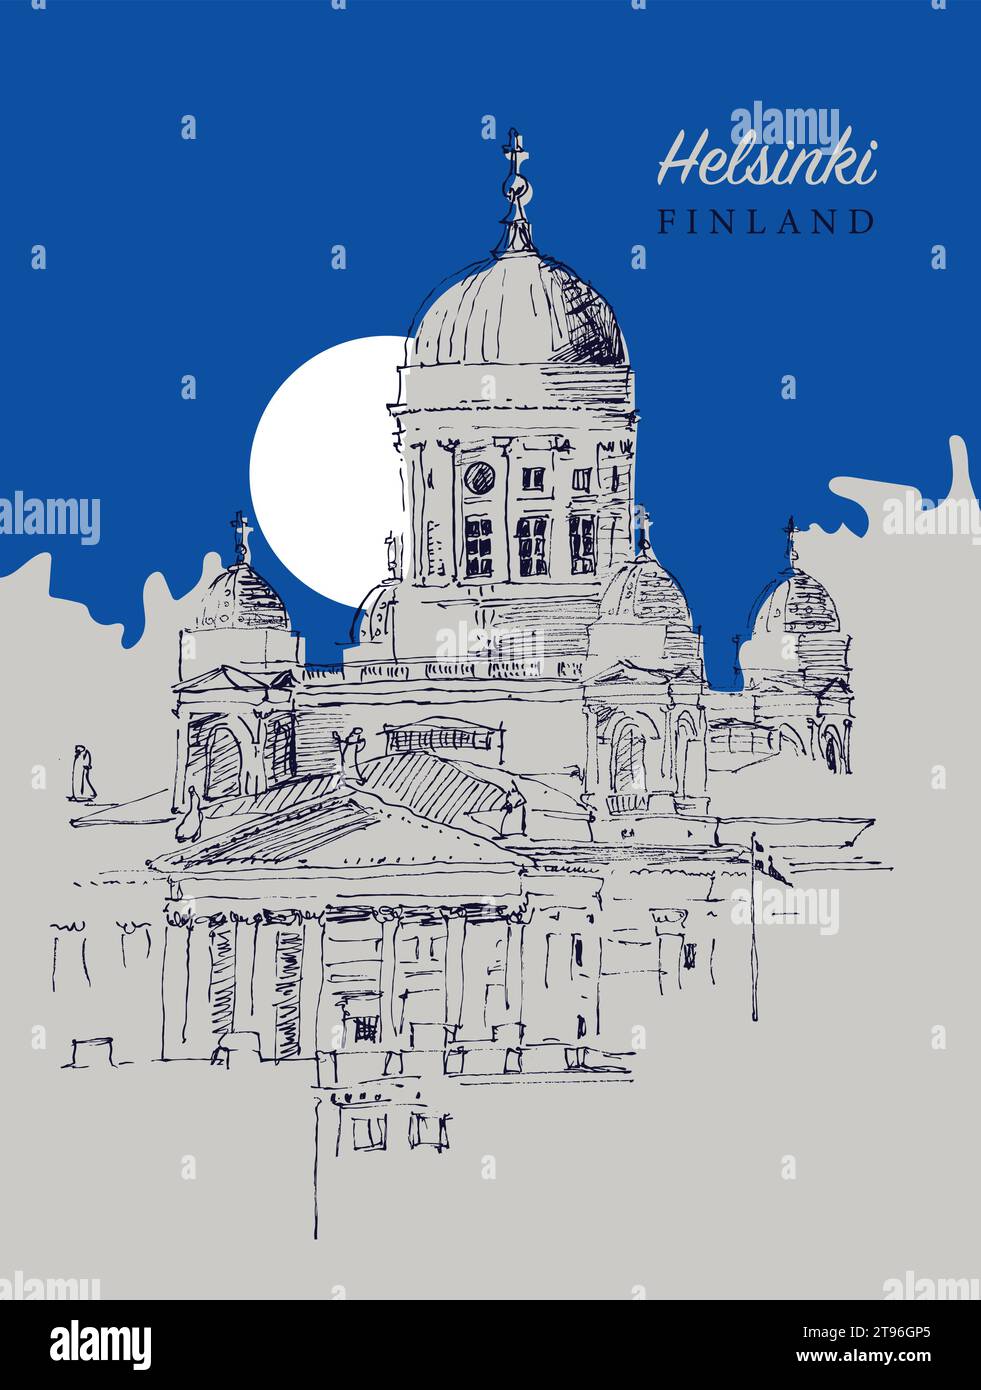 Vector hand drawn sketch illustration of the Helsinki Cathedral in Helsinki, the capital of Finland. Stock Vector